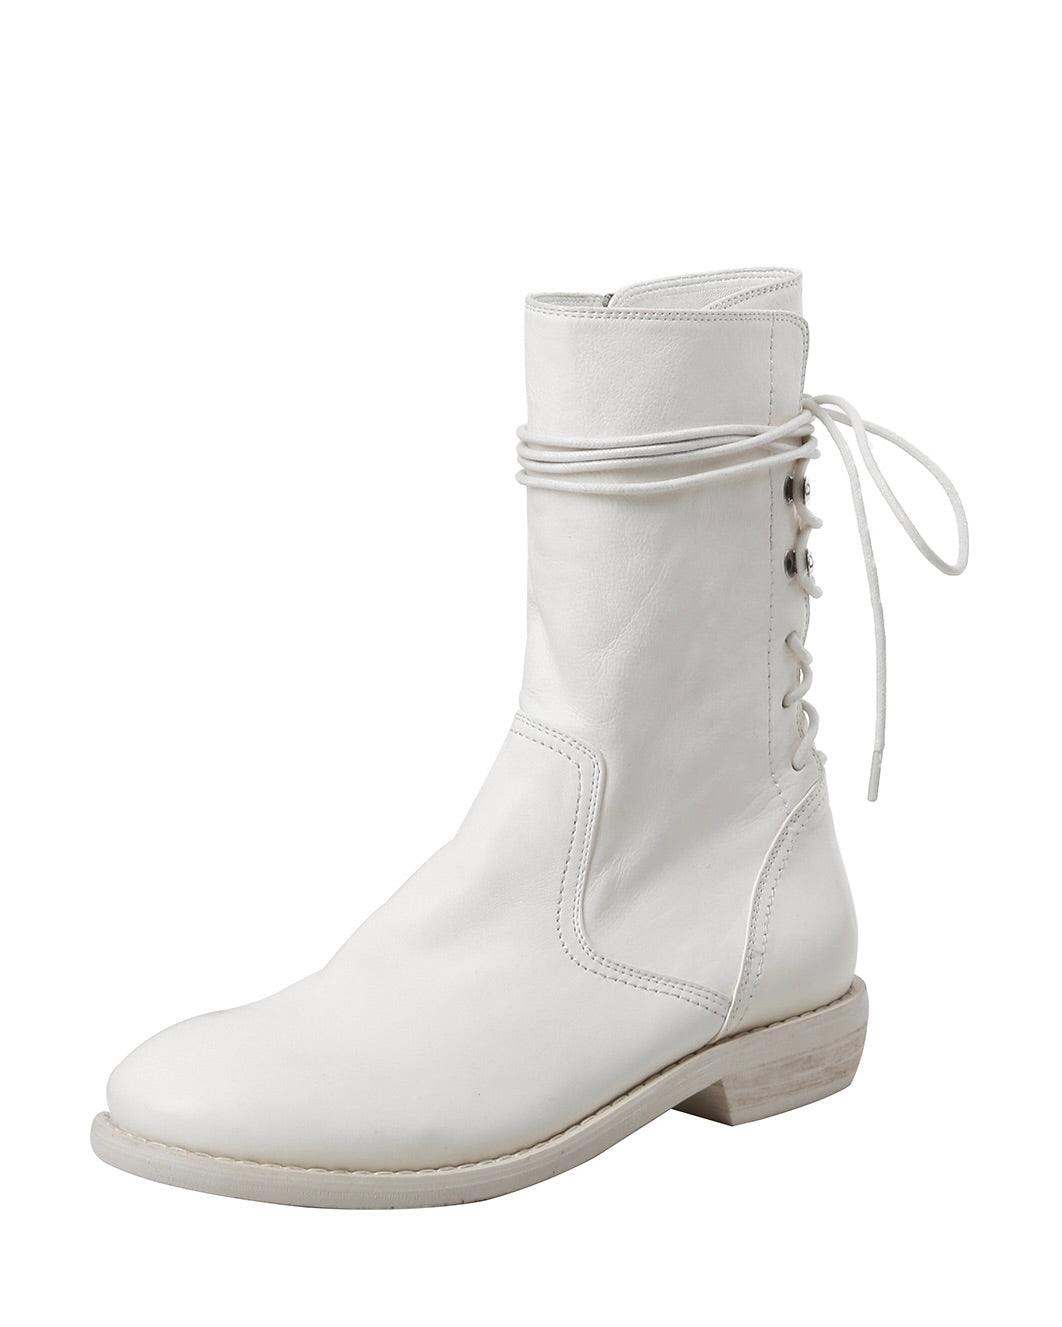 730-horsehide-boots-white